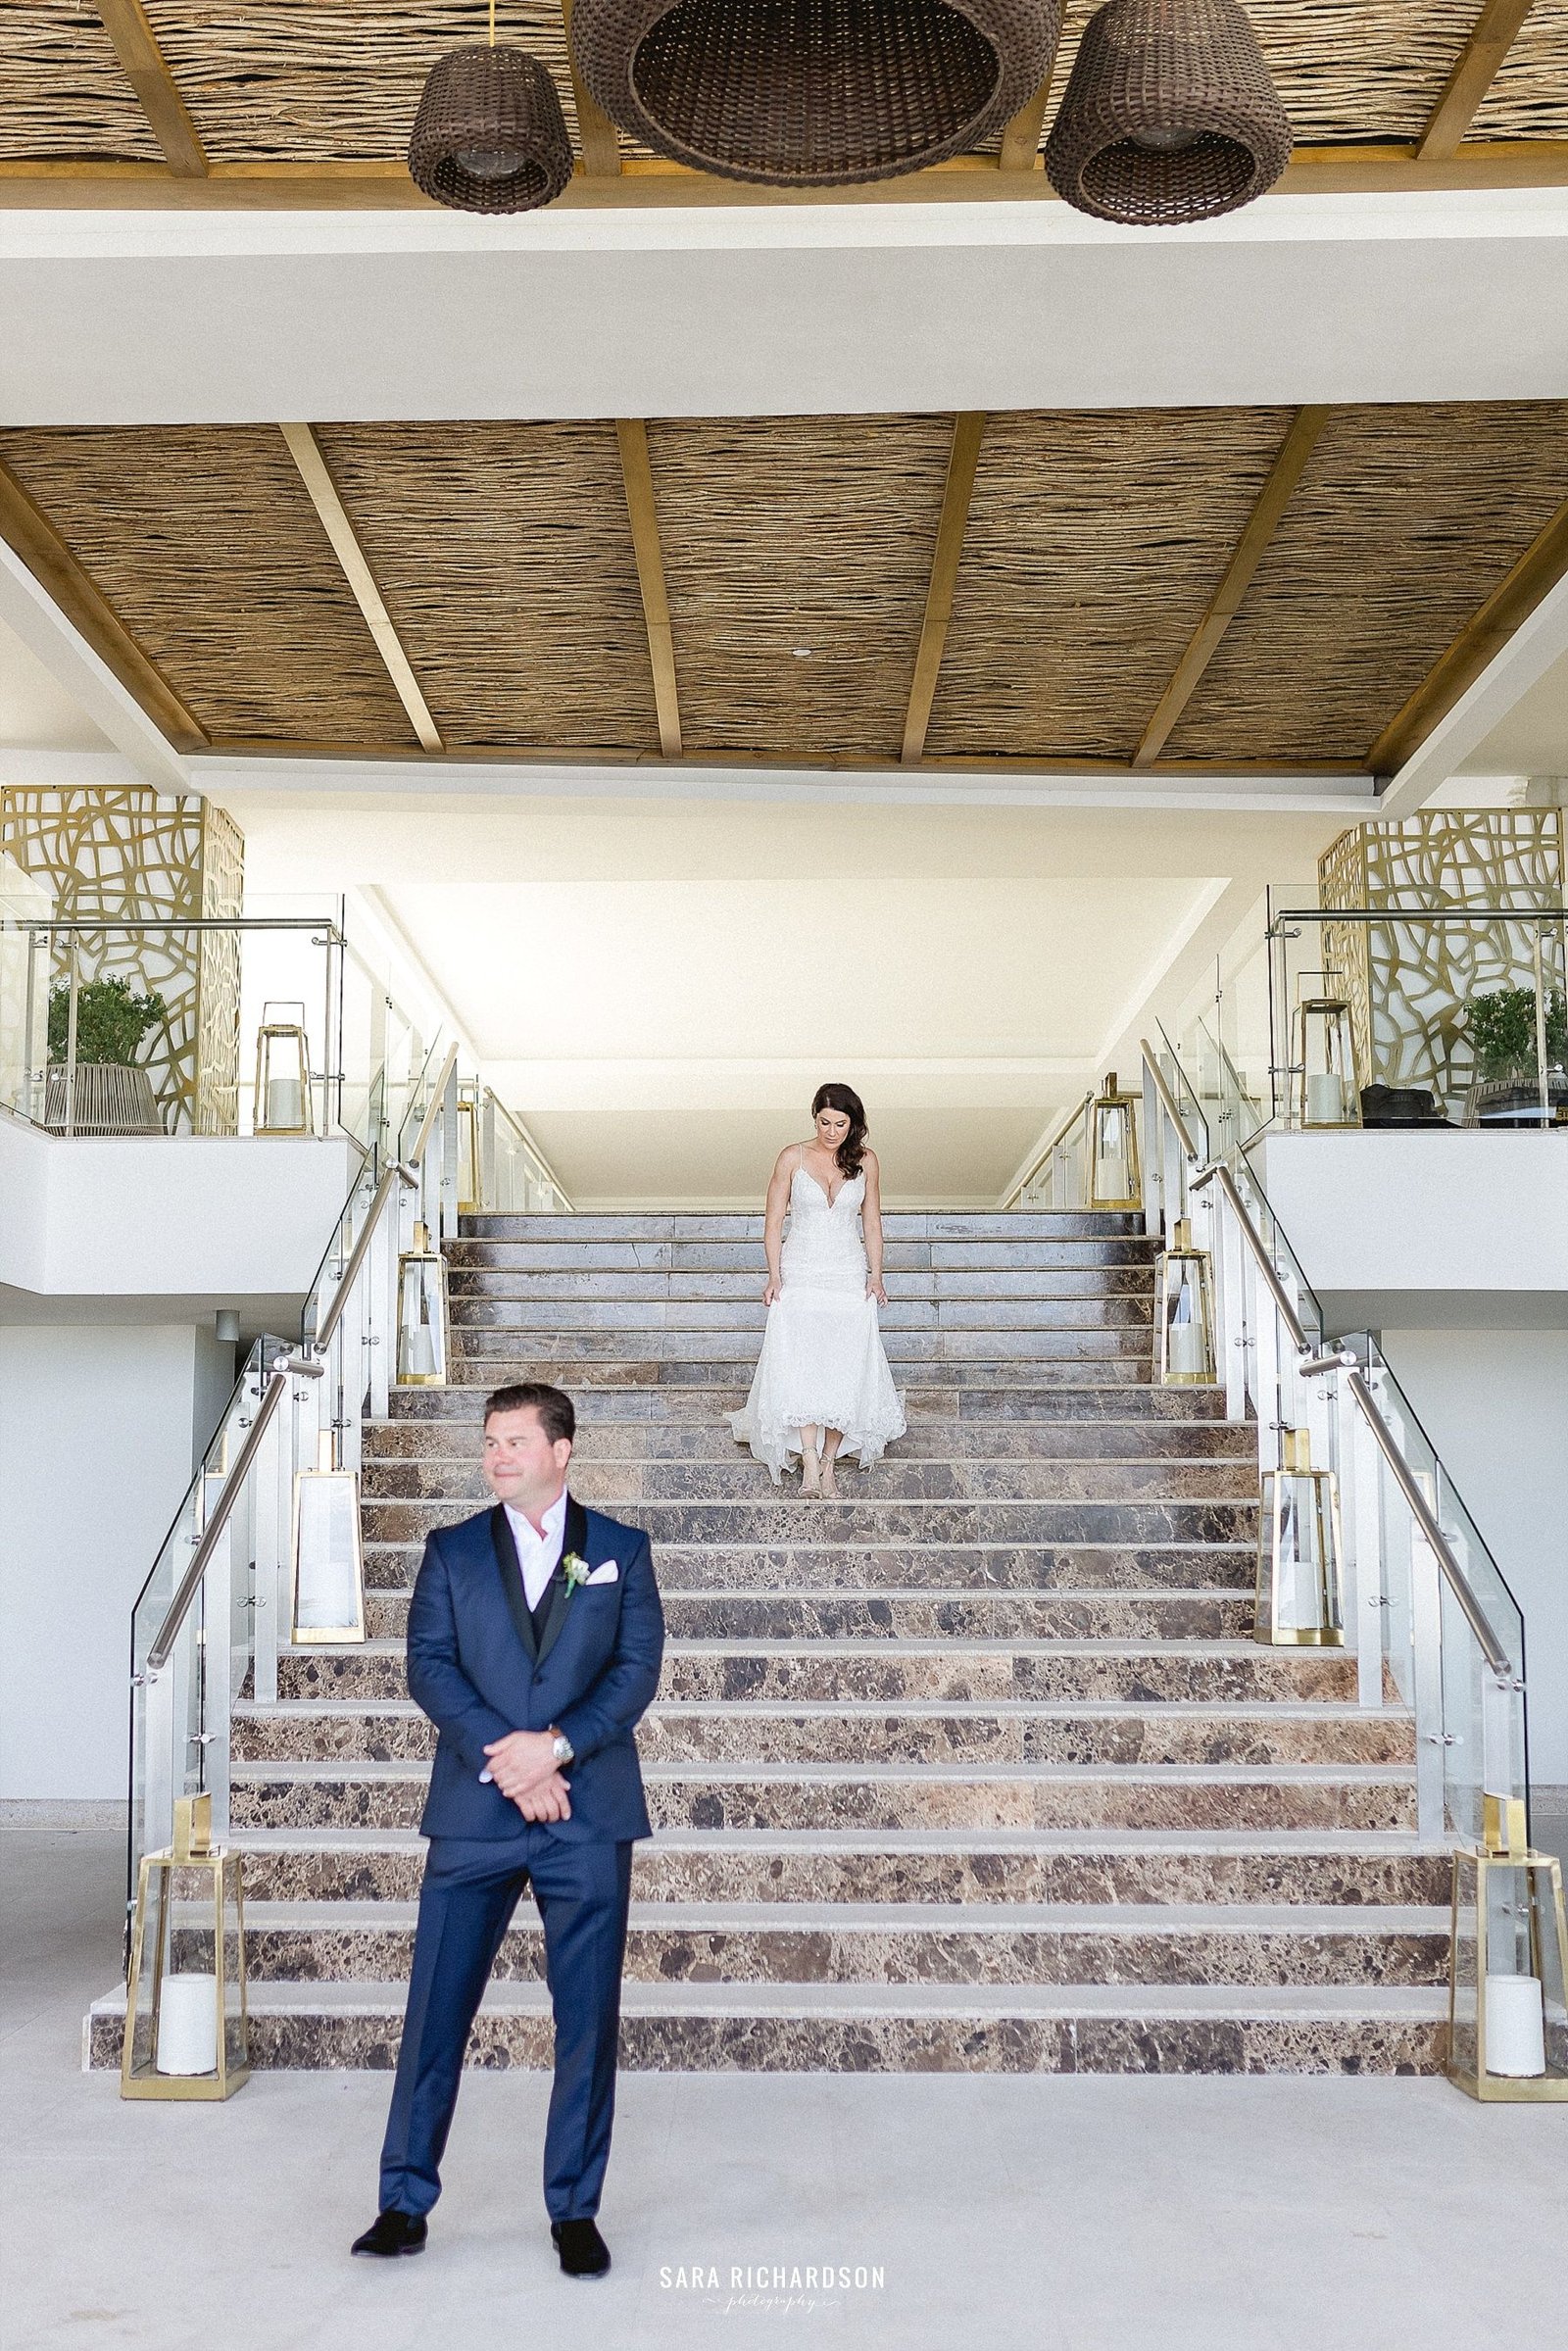 Our Bride and Groom decided to do a First Look right before the ceremony to get some more special moments before their wedding ceremony. They had such a great time doing this, and they both looked amazing! Thank you to Jimmy Choo shoes for making our Bride look amazing and making her legs look beautiful as she was walking down the stairs to do her first look!